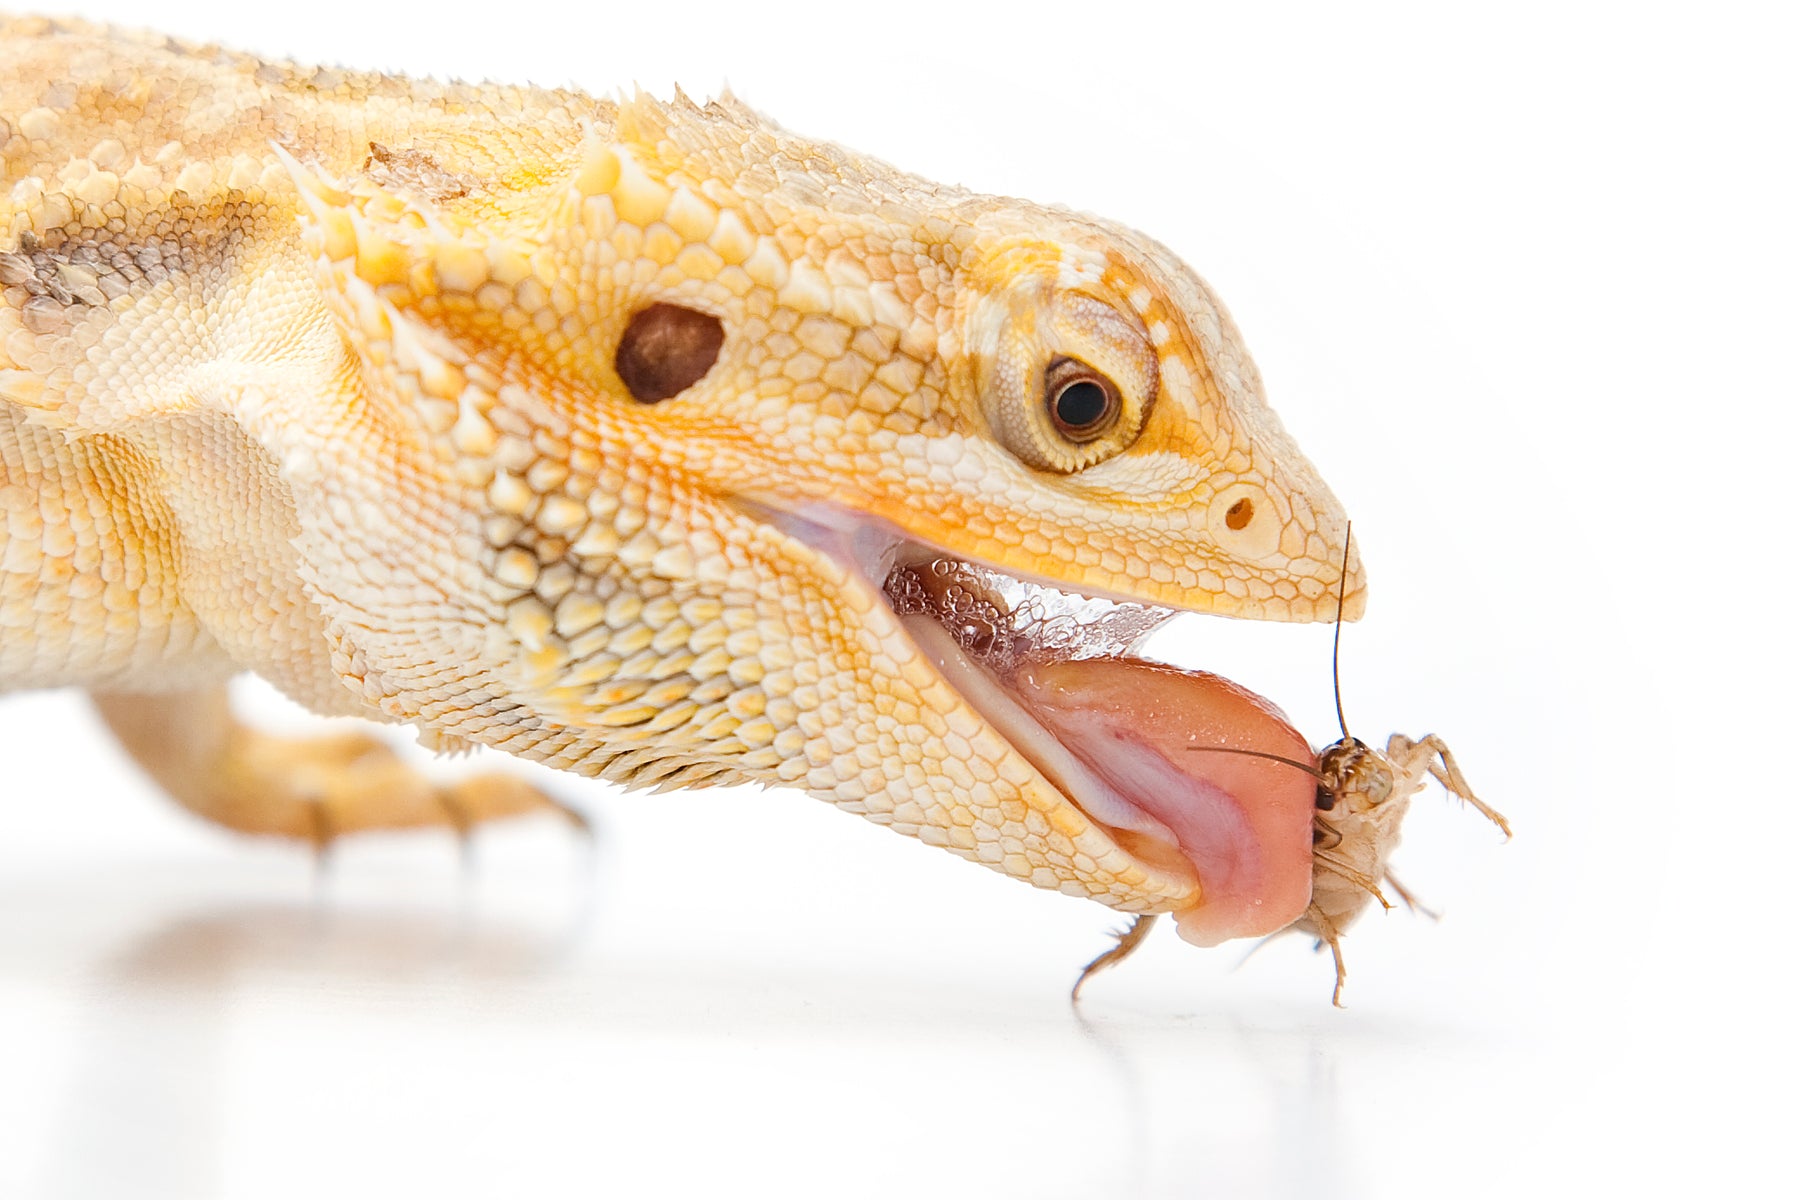 Can Bearded Dragons Eat Meat?